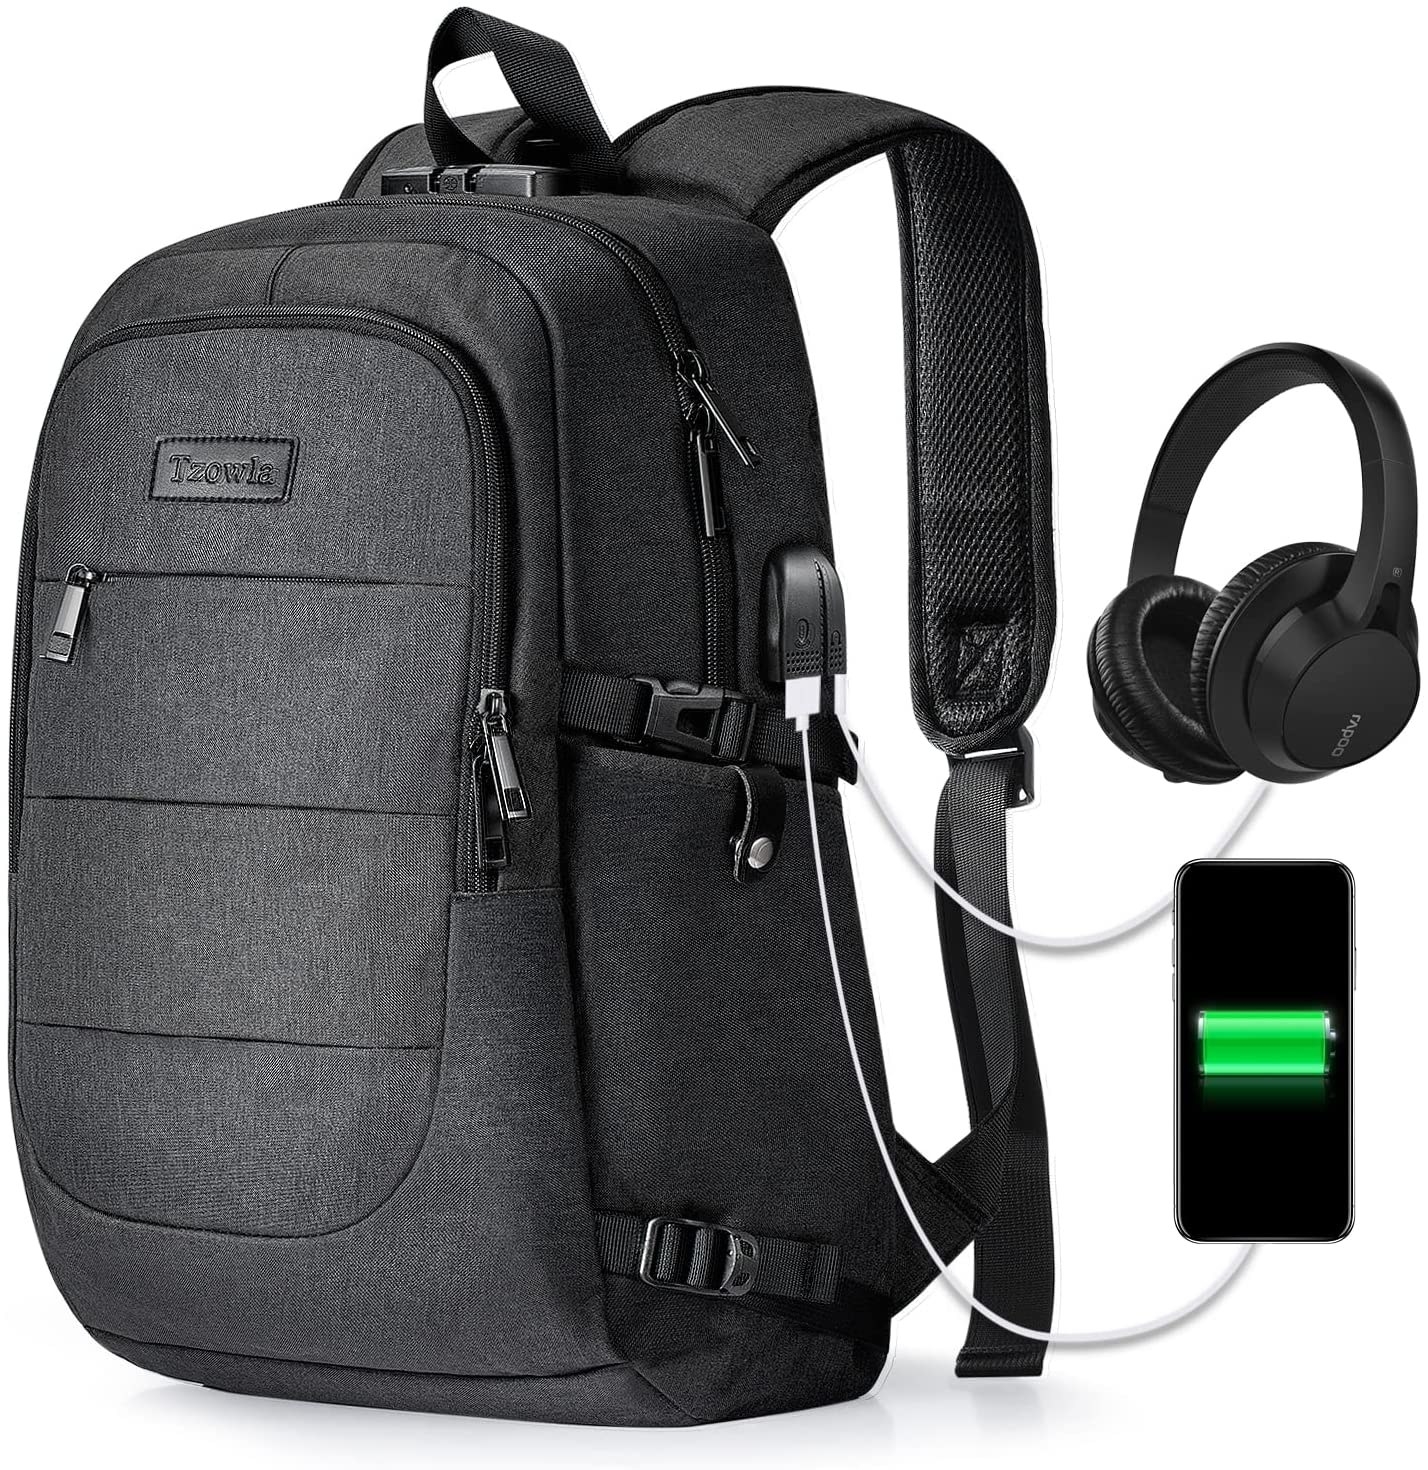 The backpack with a phone and headphones plugged in against a plain background